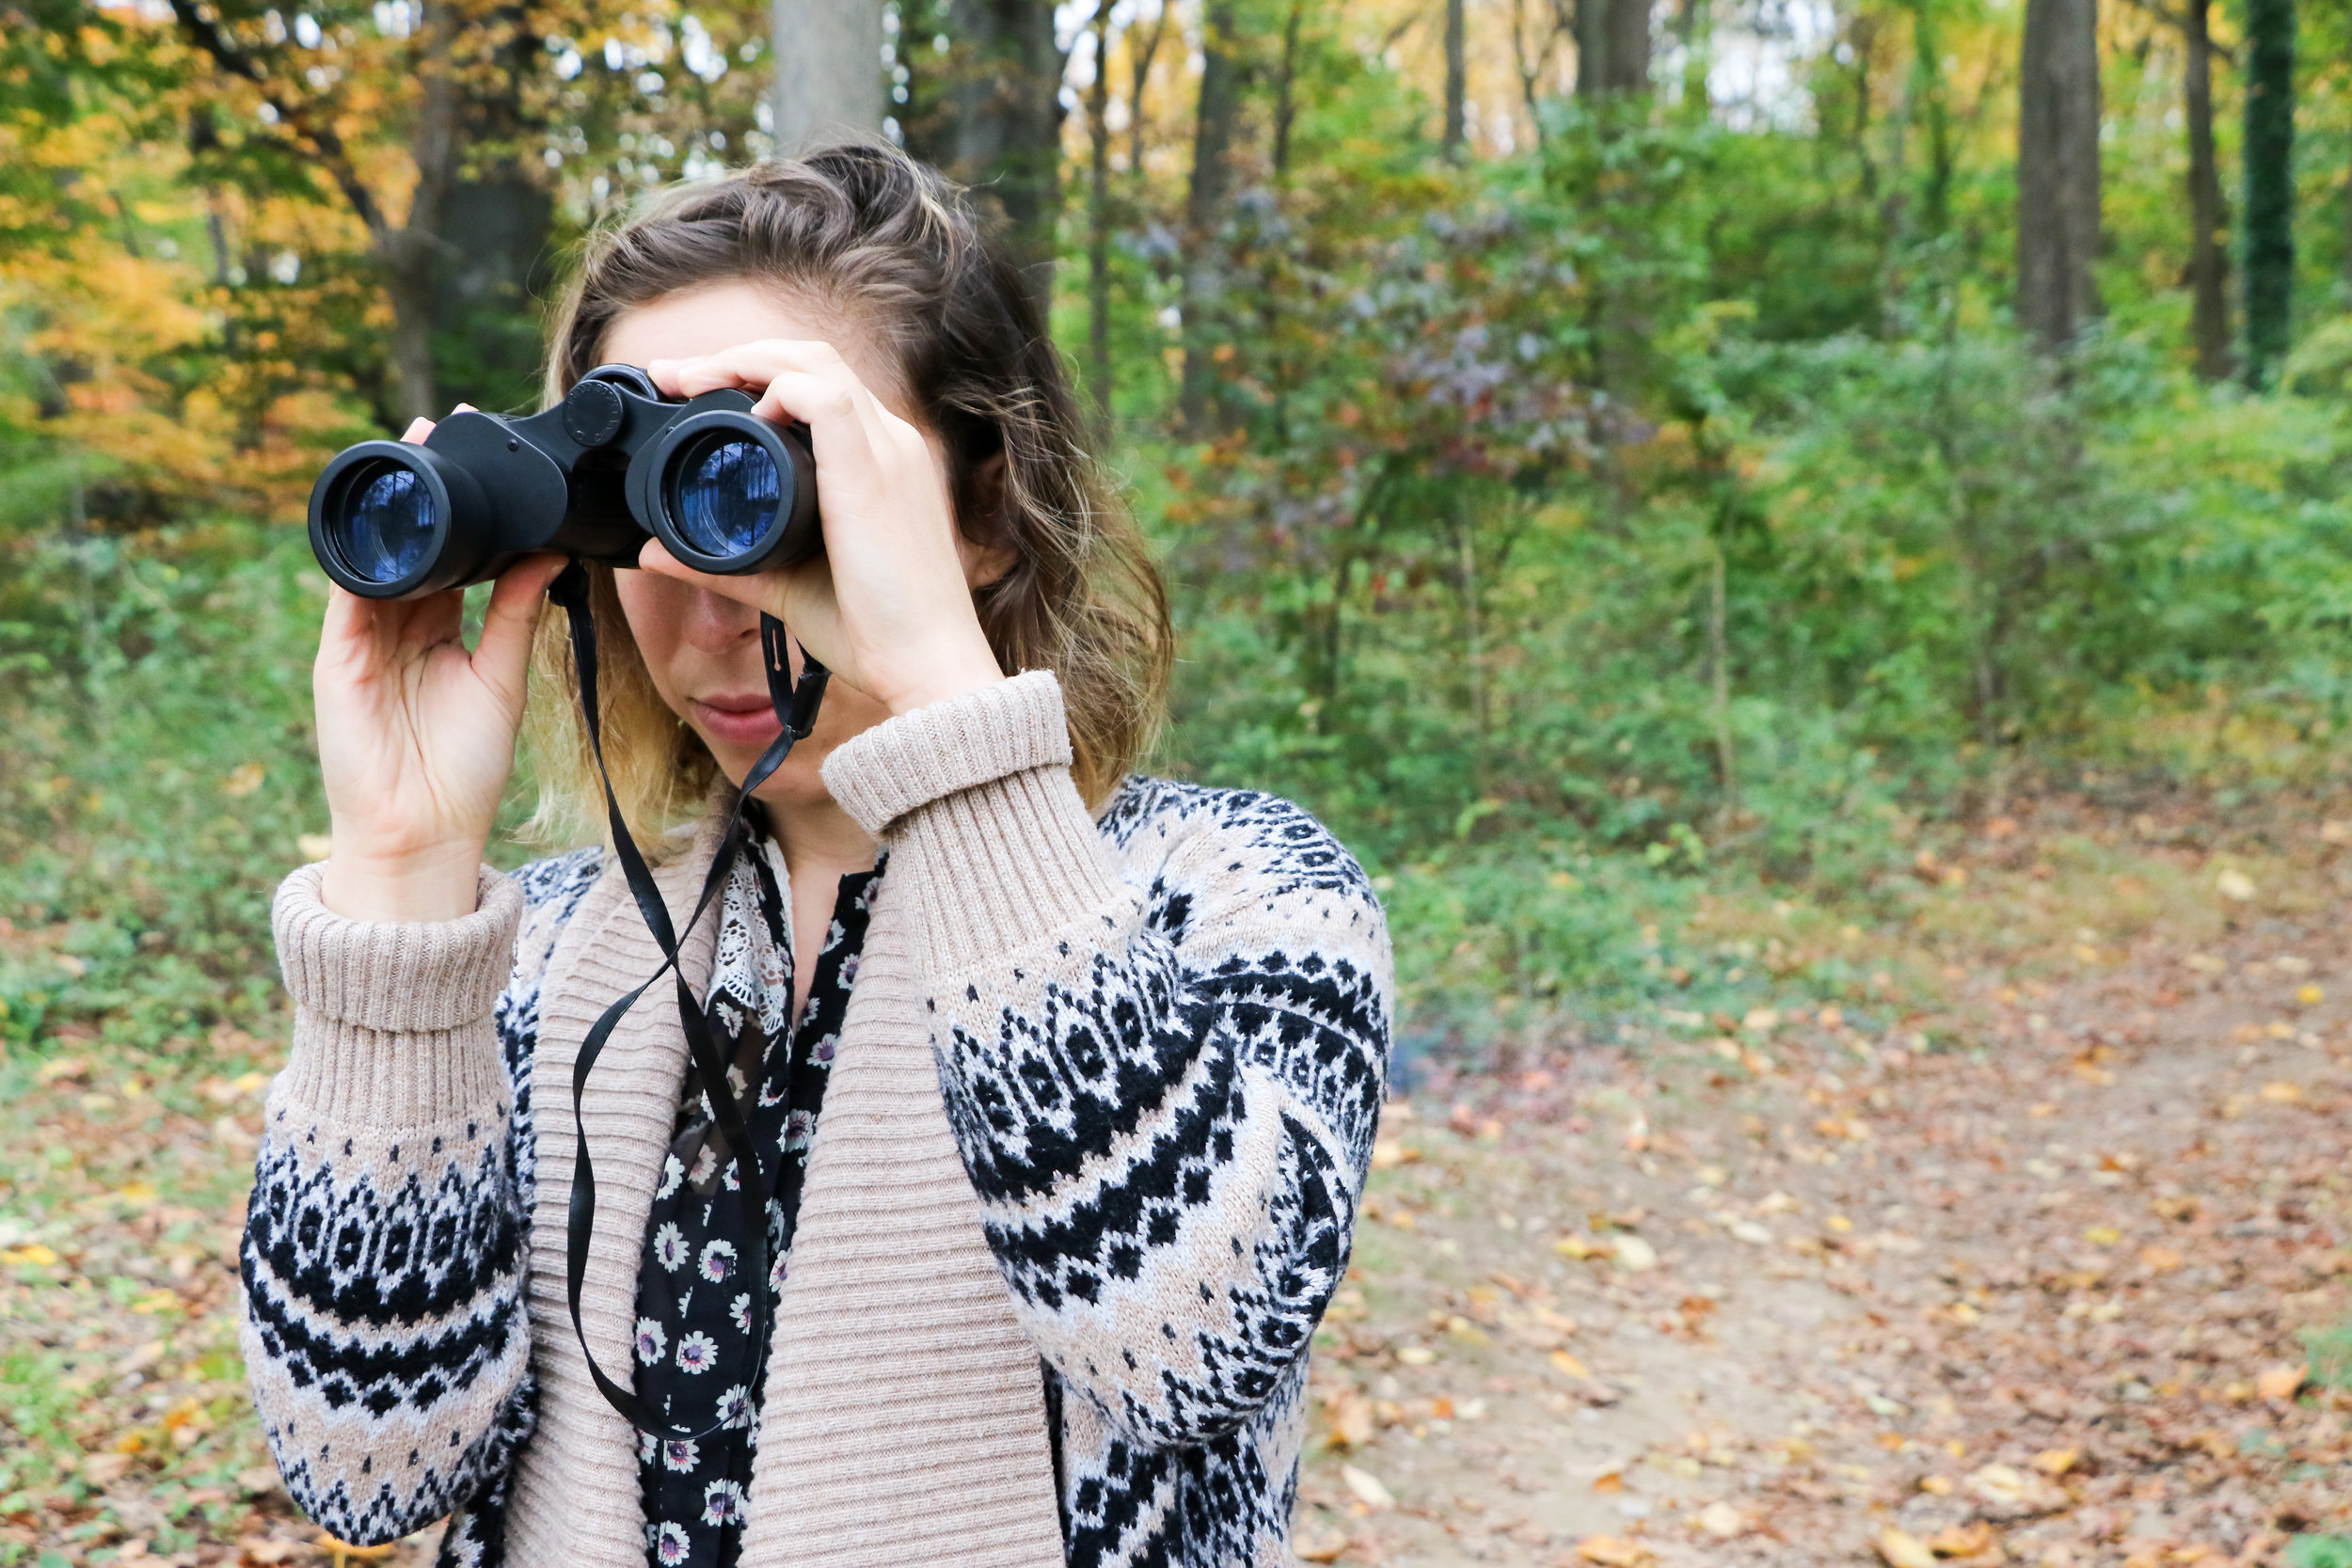 Alt text:  a young white woman with streaky brown and blonde hair looks through big black binoculars in the middle of a nature path. She’s wearing a thick blue and tan cardigan over a floral shirt.